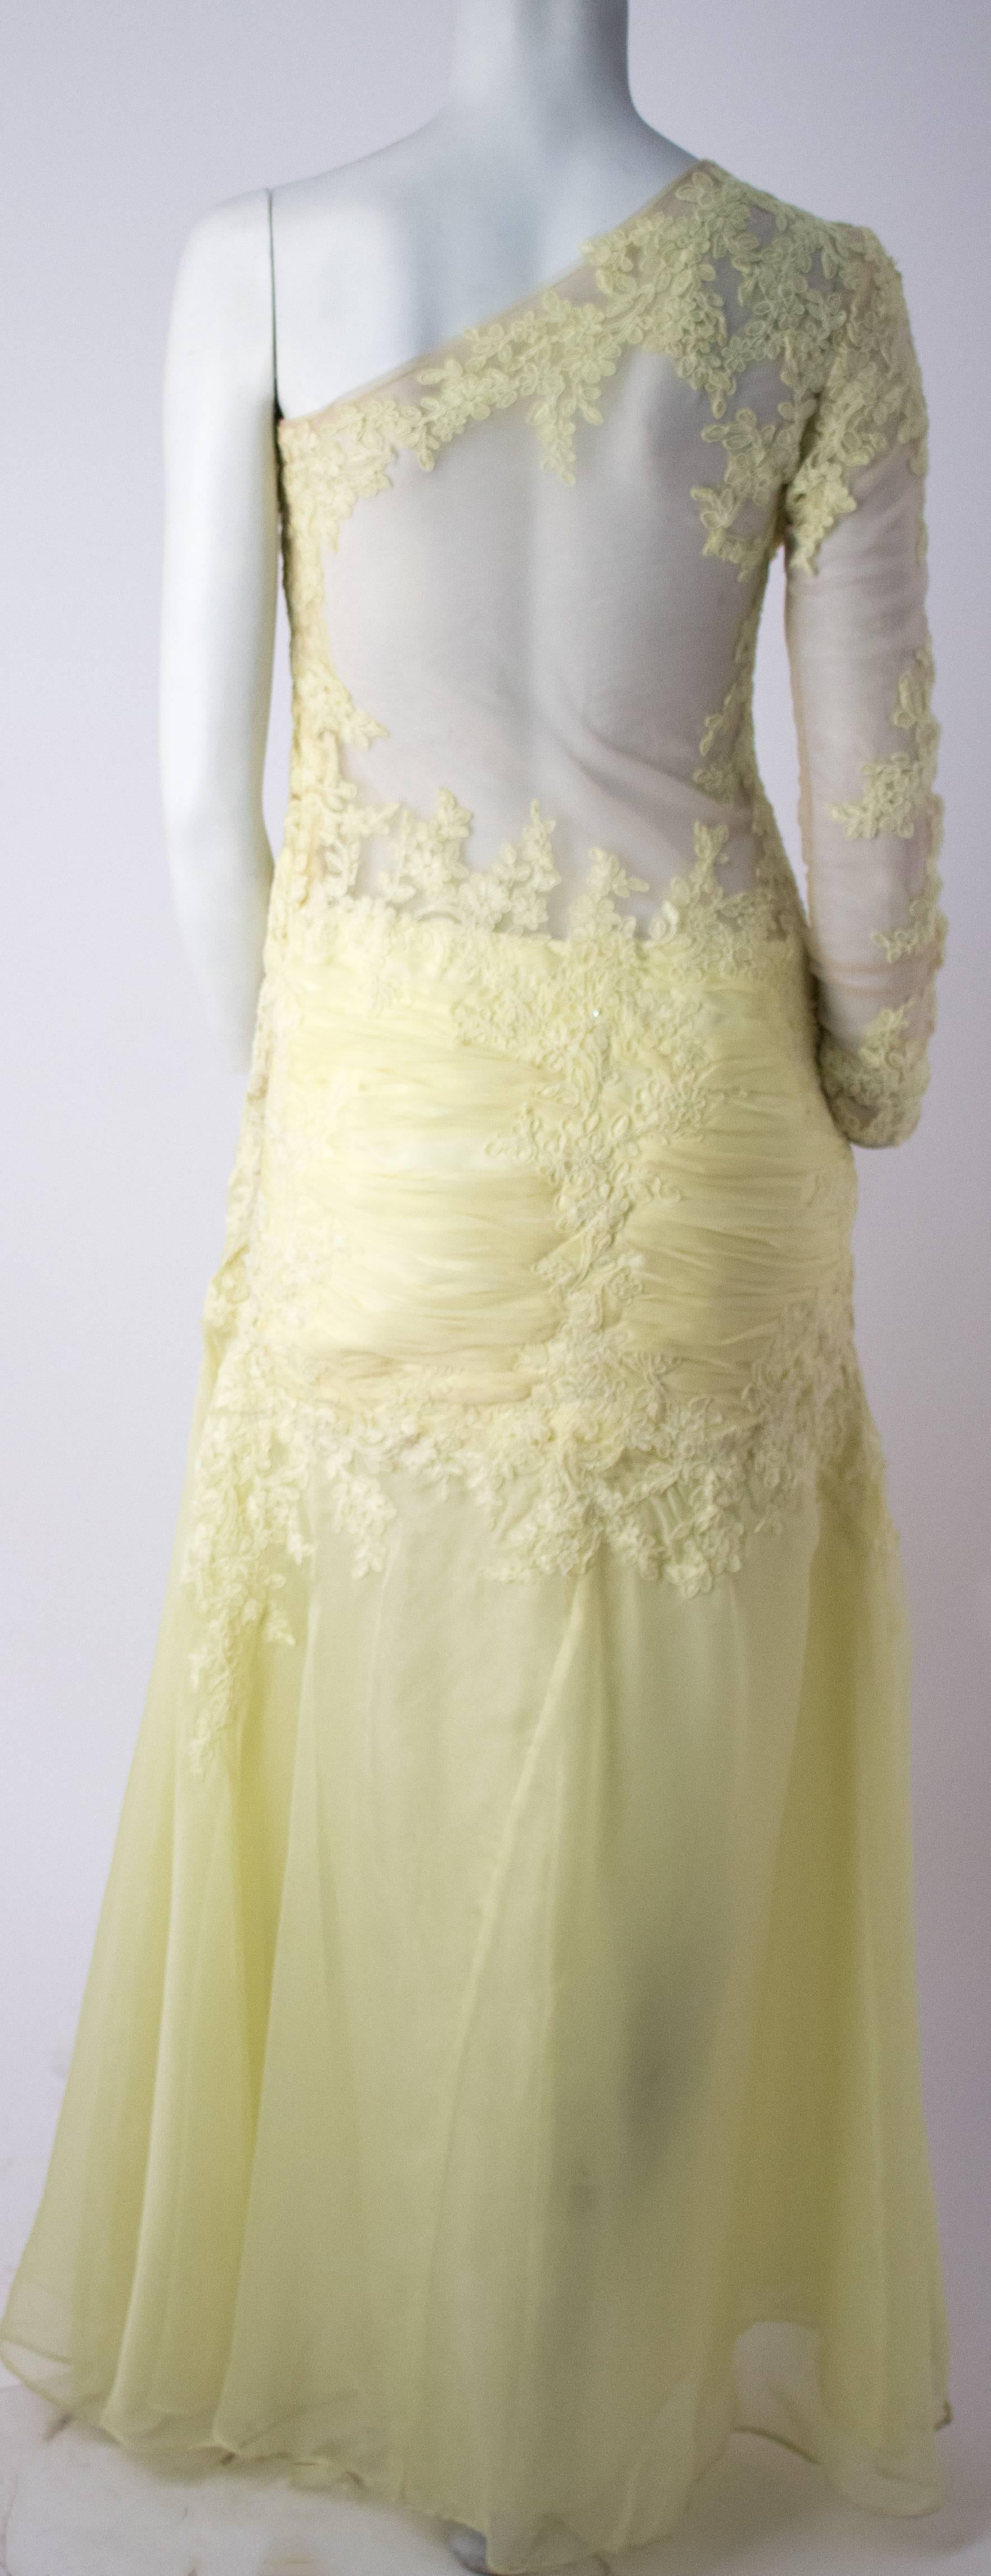 80s Yellow Lace Evening Gown. Lined in nude mesh, lace appliqué on bodice and sleeve.